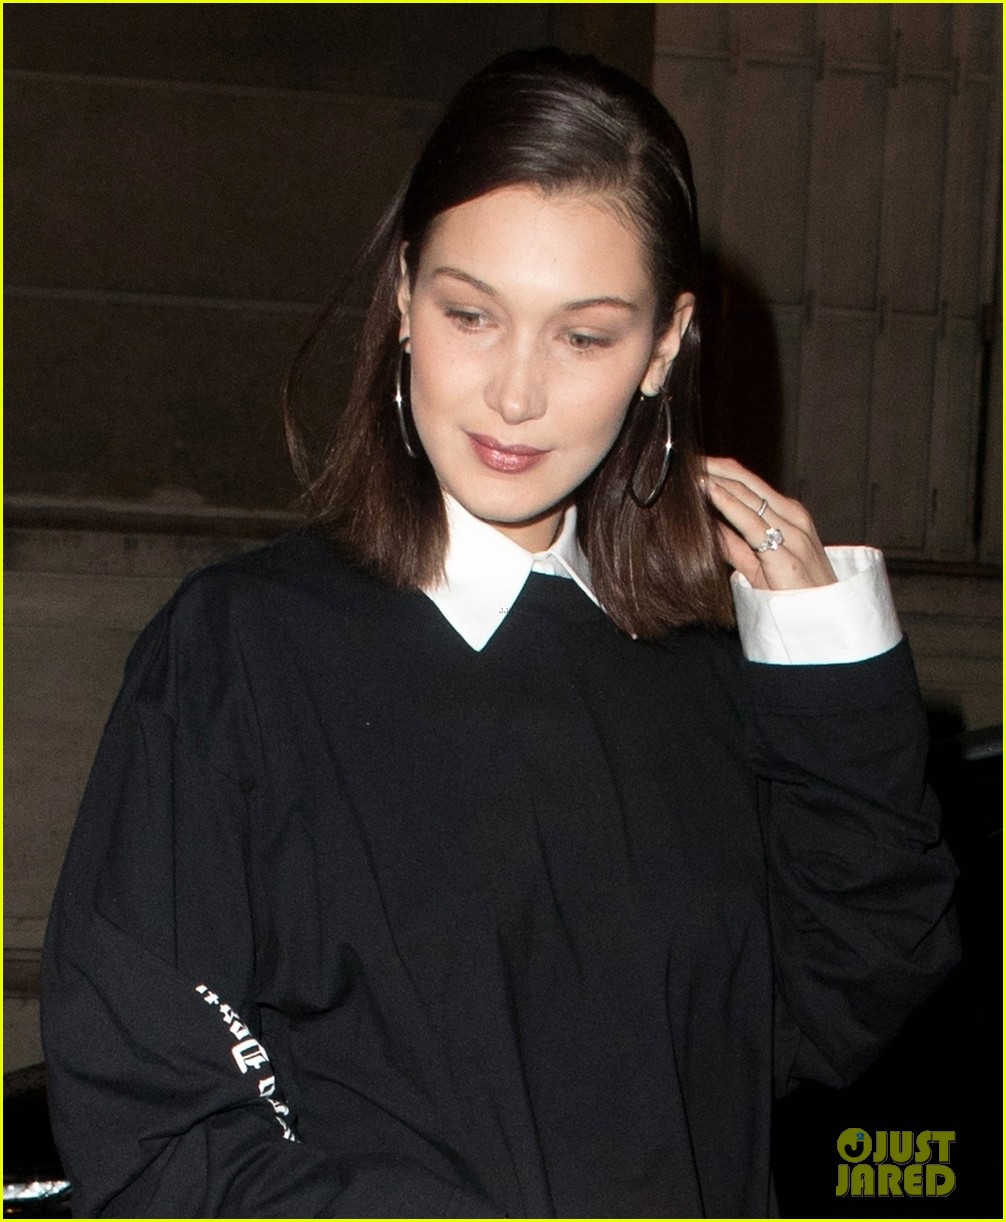 bella hadid sports little black dress and floral boots for night out in paris2 02